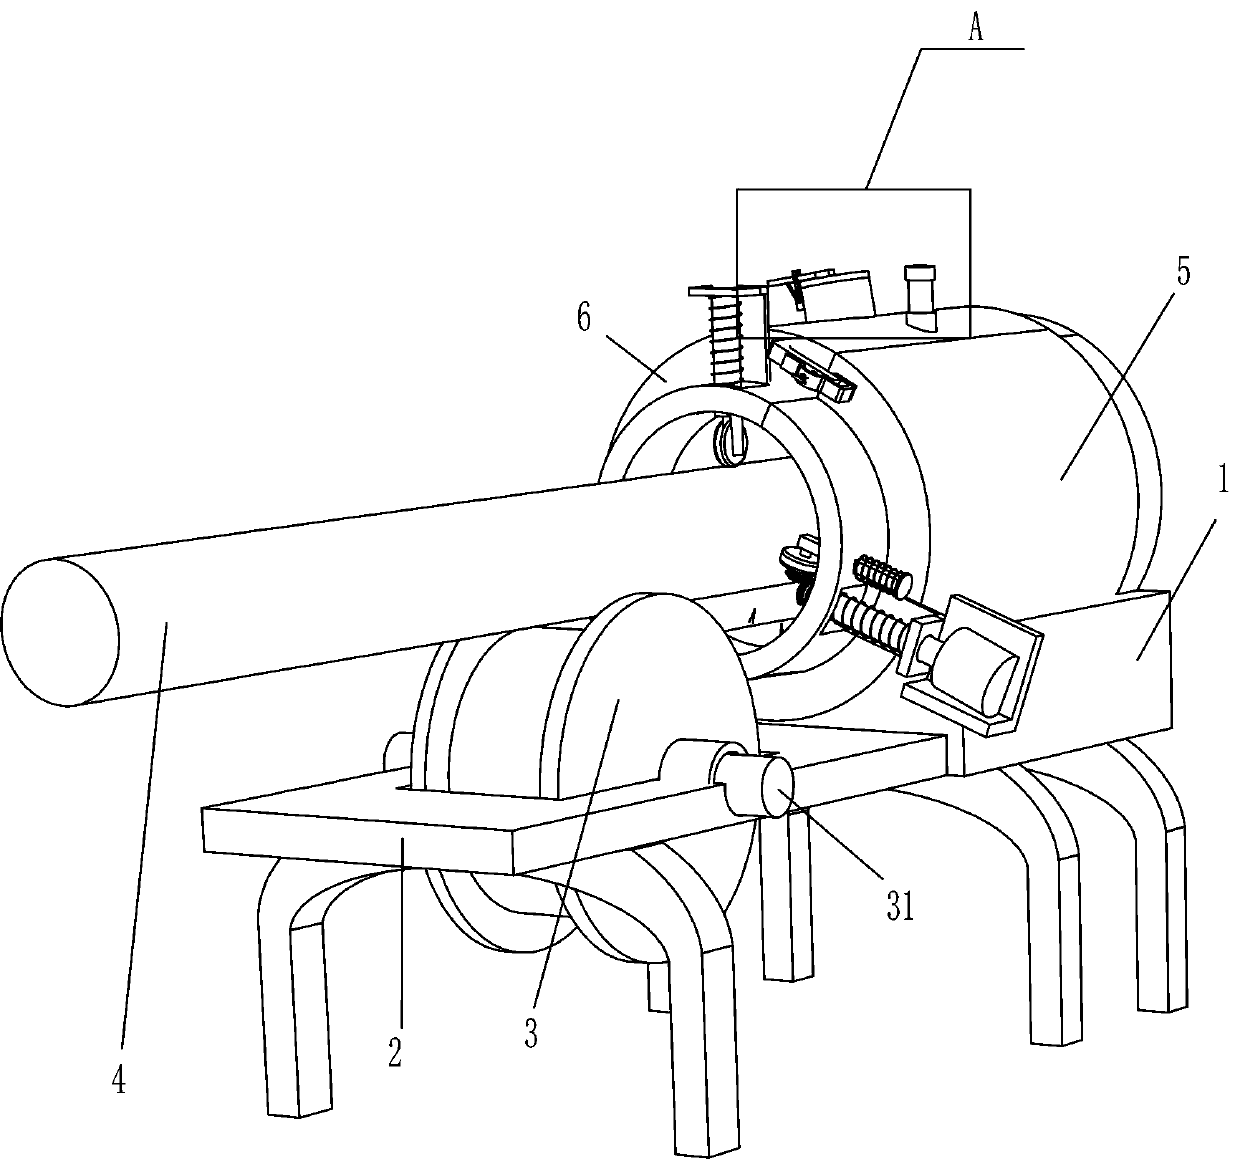 Firefighting pipe paint spraying device